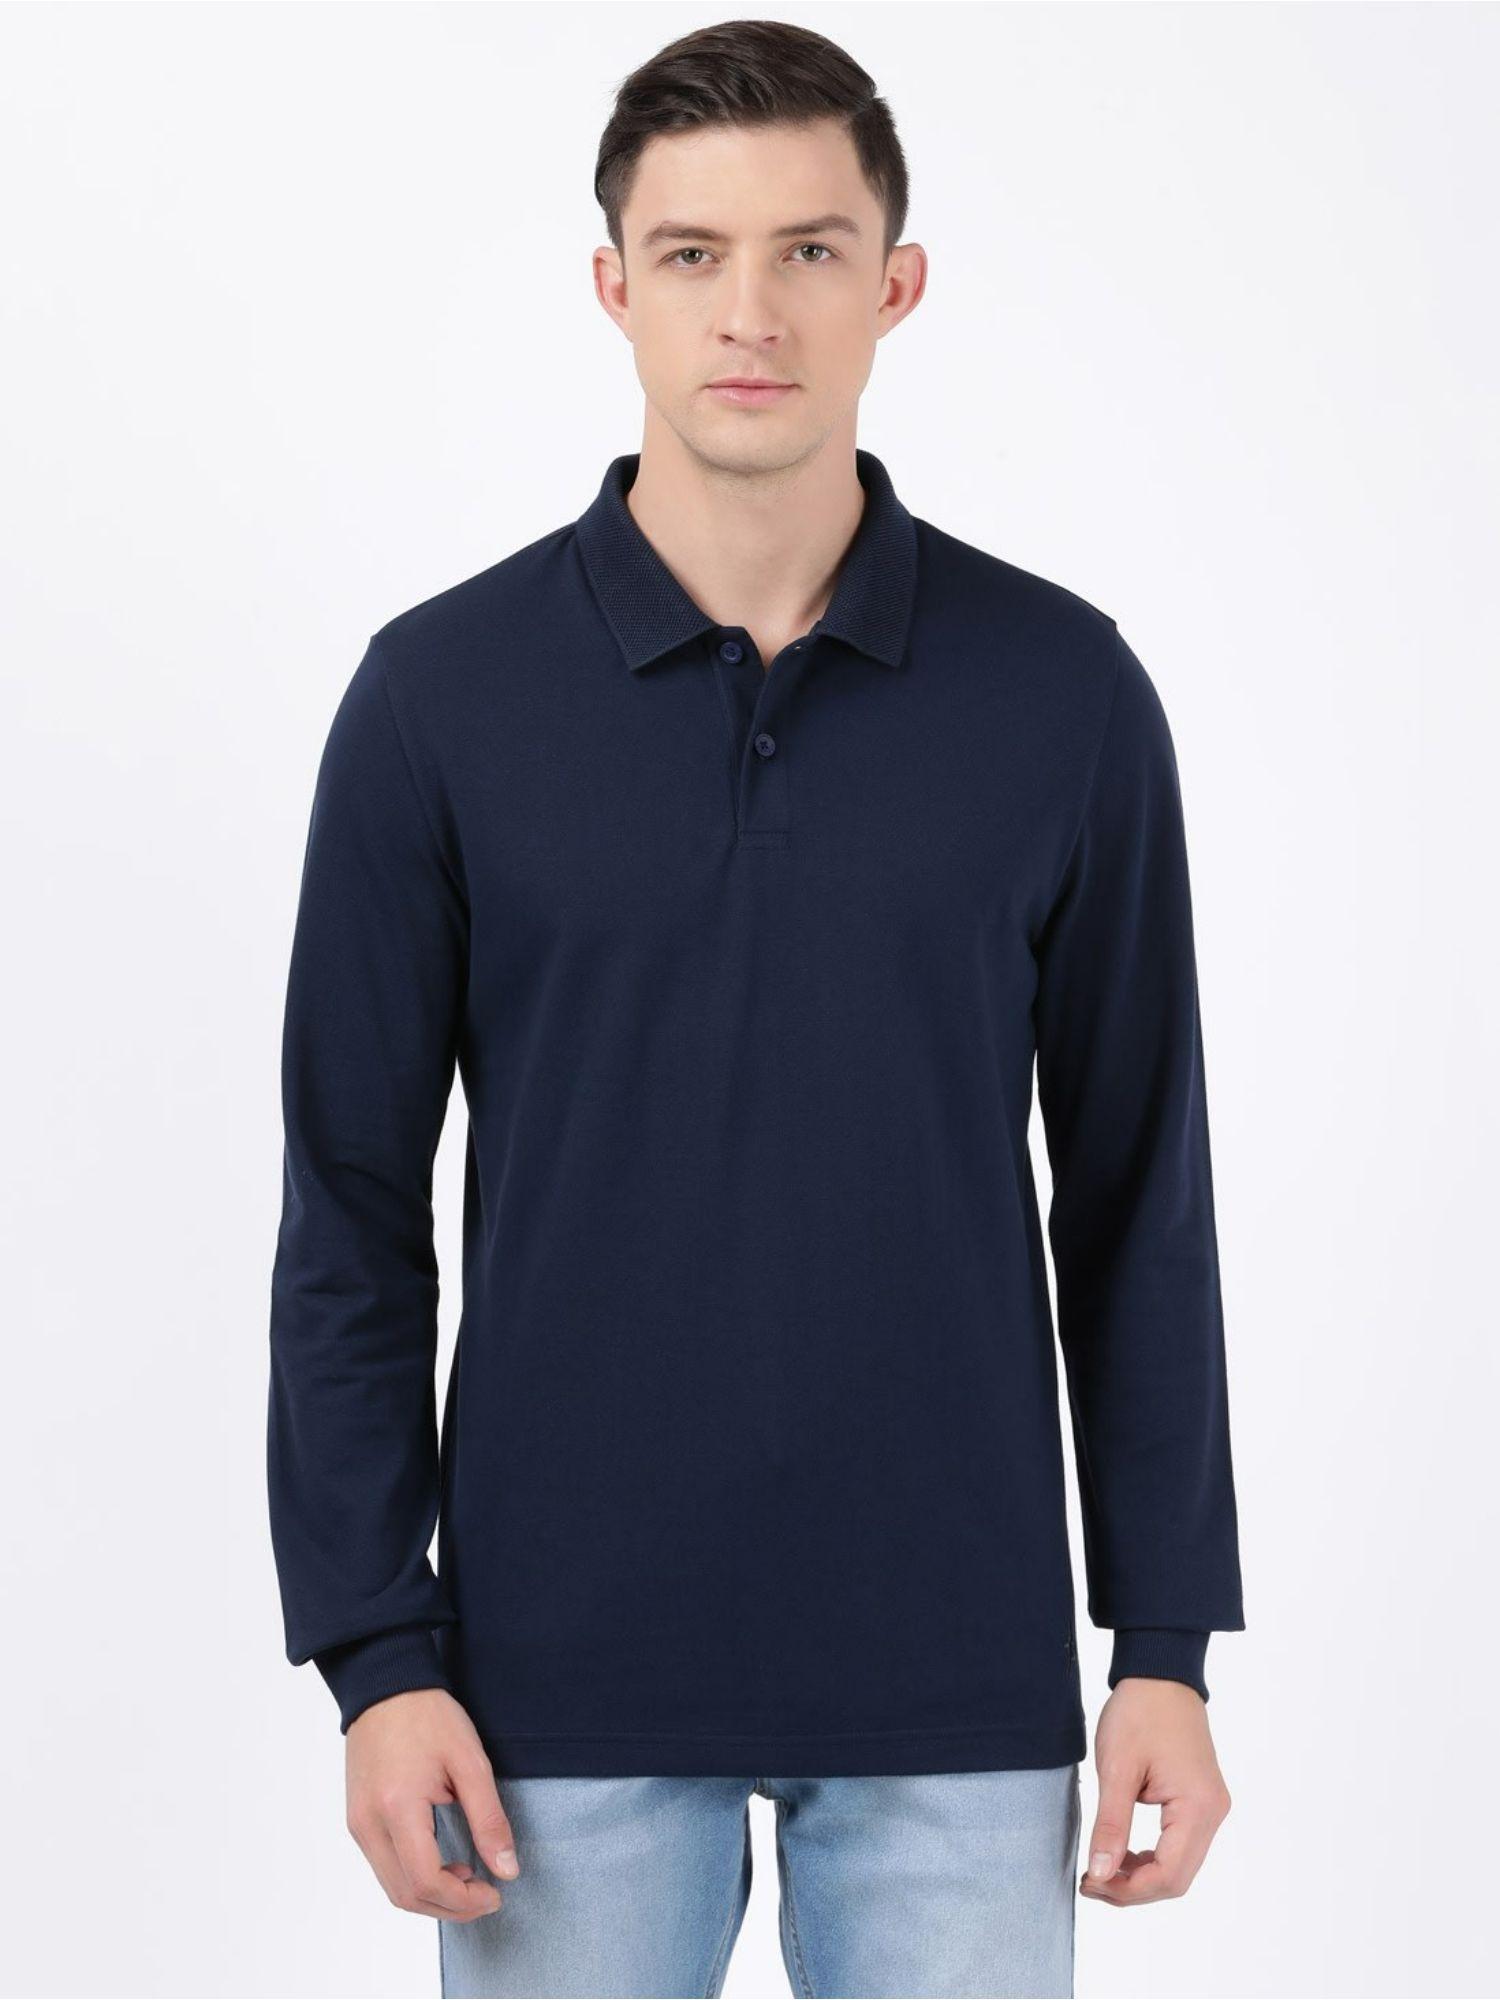 am96-mens-super-combed-cotton-rich-full-sleeve-polo-t-shirt-with-ribbed-cuffs-navy